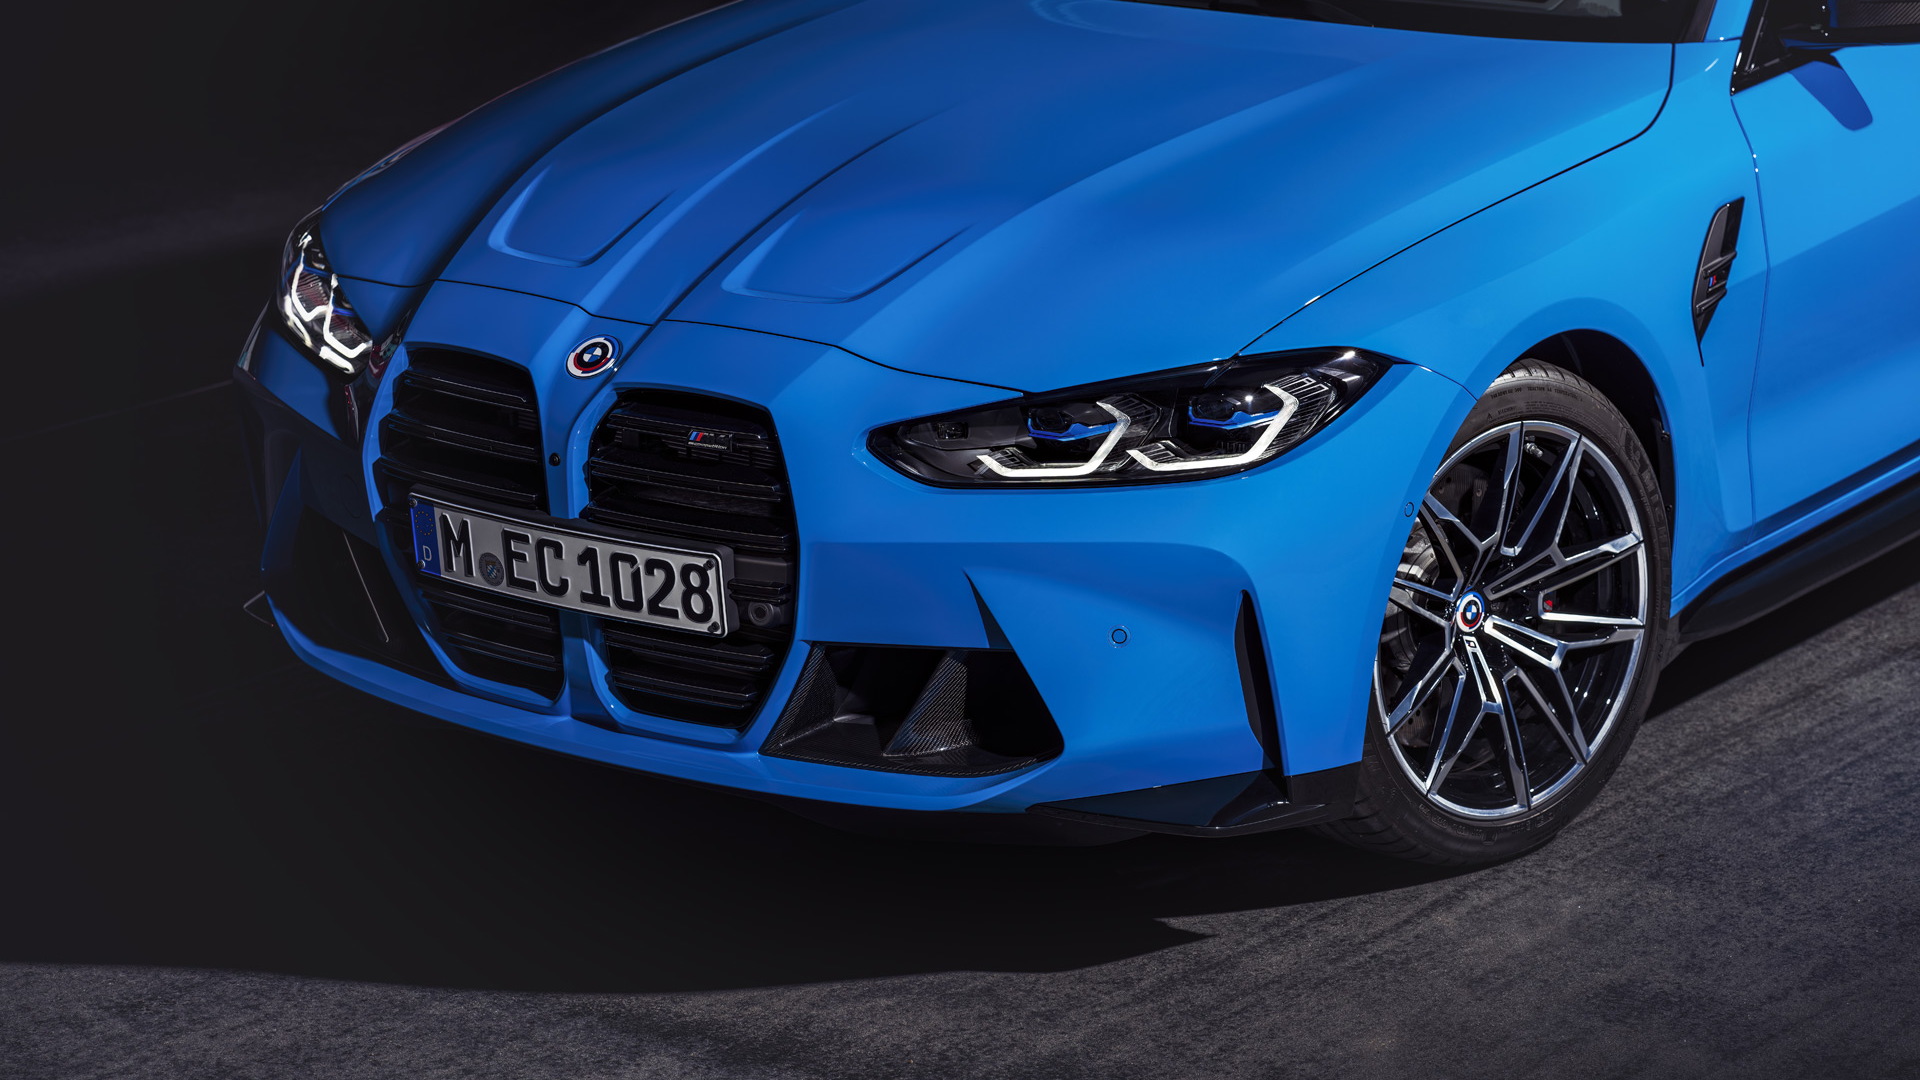 BMW M's 50th anniversary in 2022 to be celebrated with retro badges